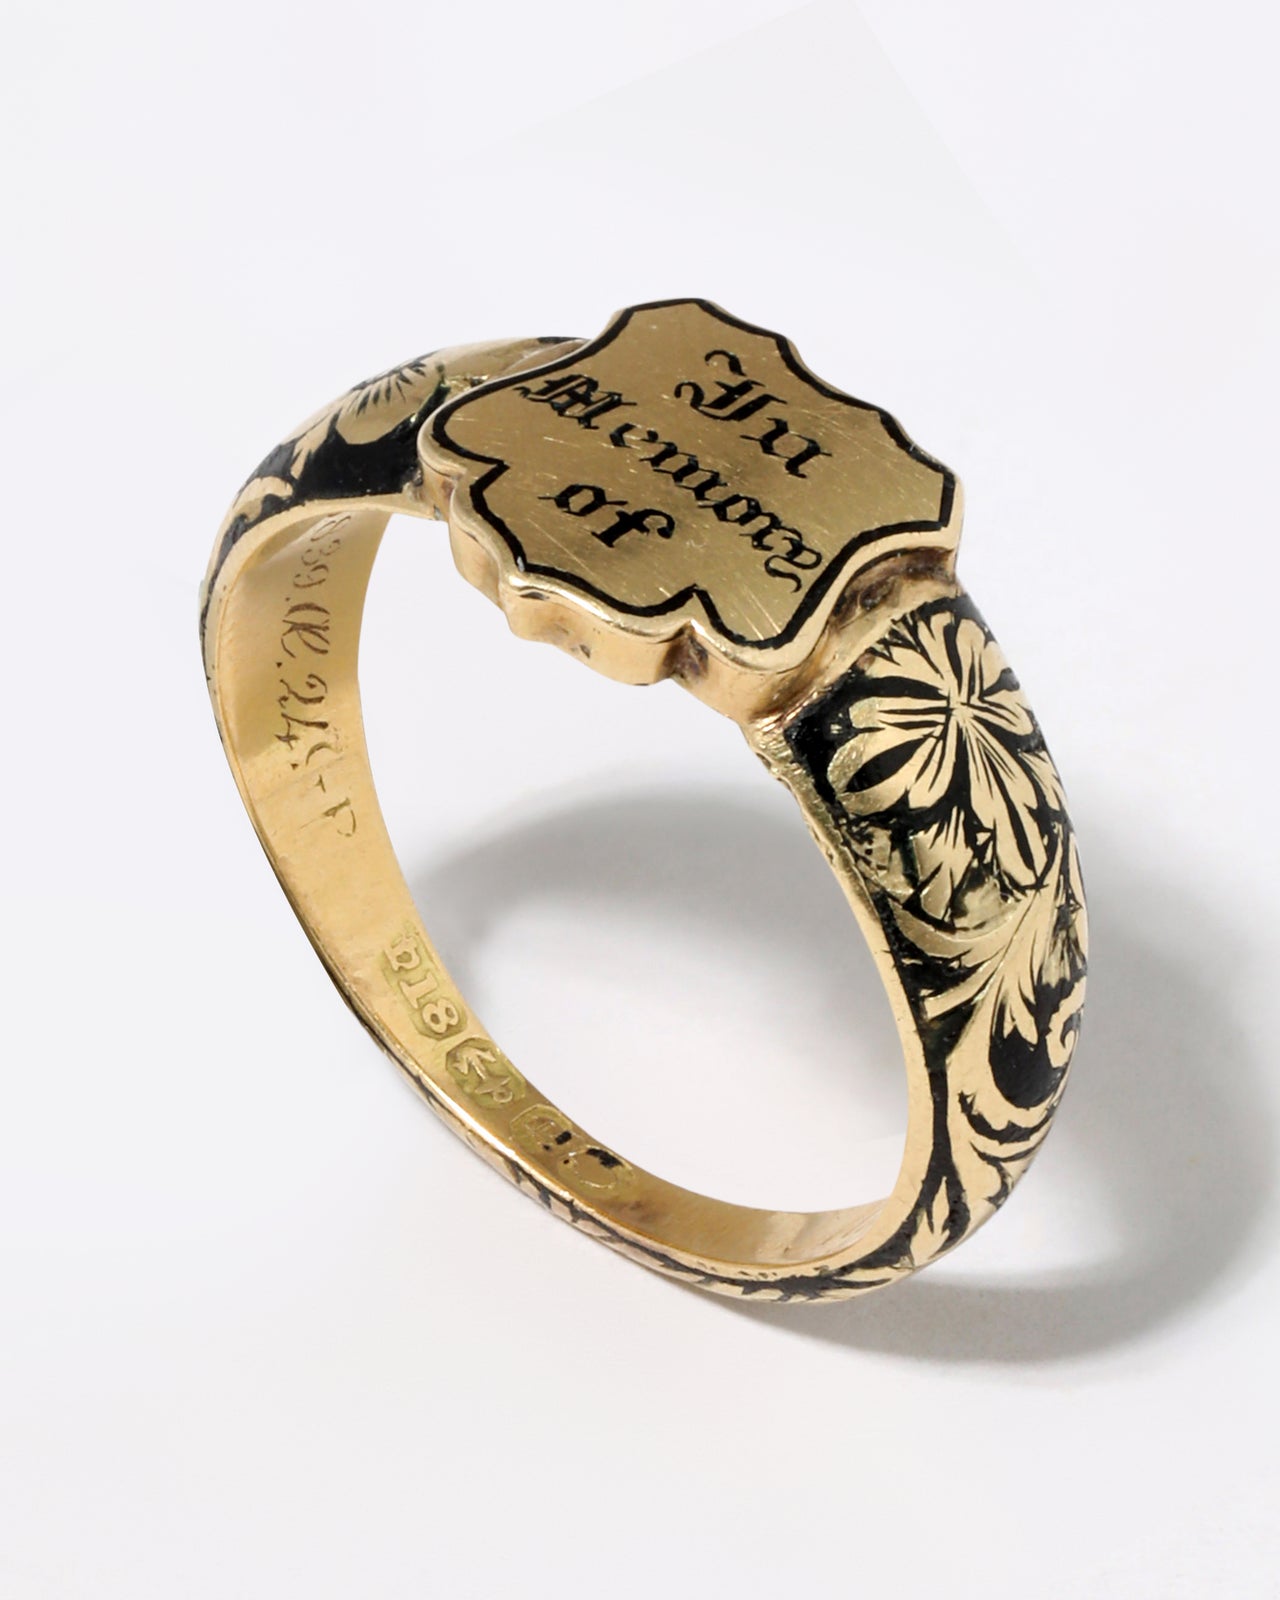 Antique 18k Gold and Enamel In Memory Ring - Photo 2